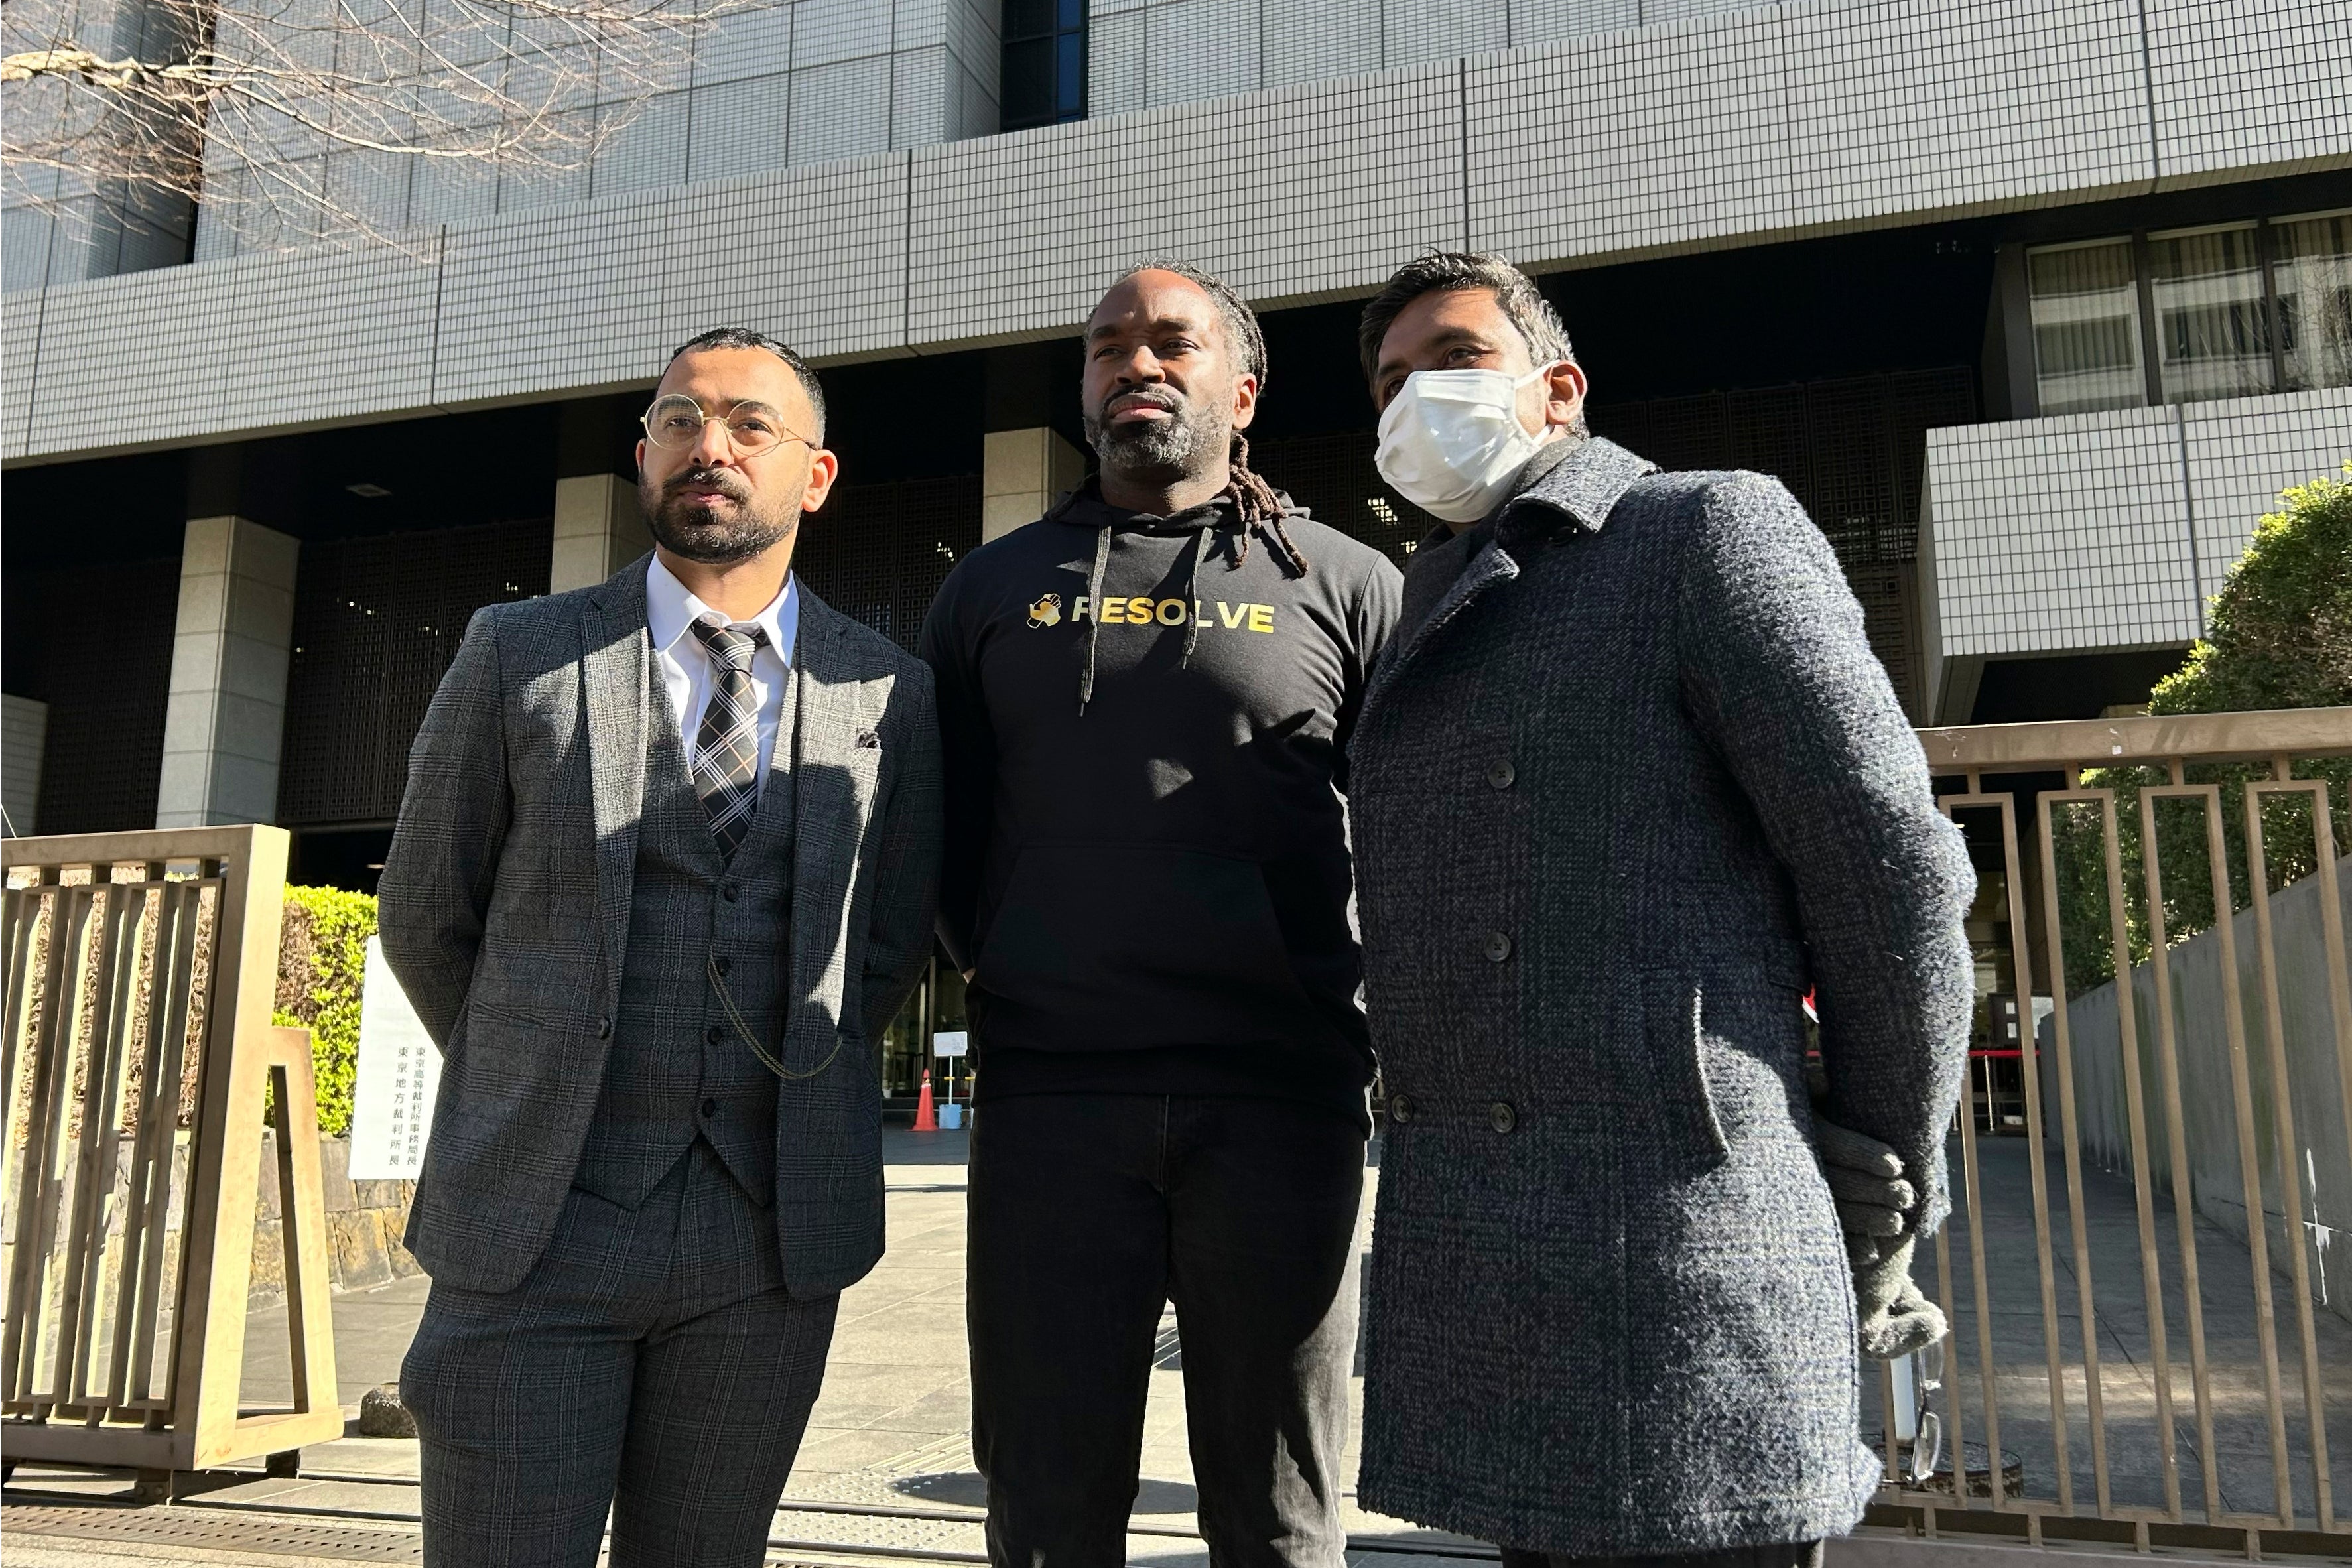 Syed Zain, Maurice and Matthew have accused Japanese local and national governments of racial profiling